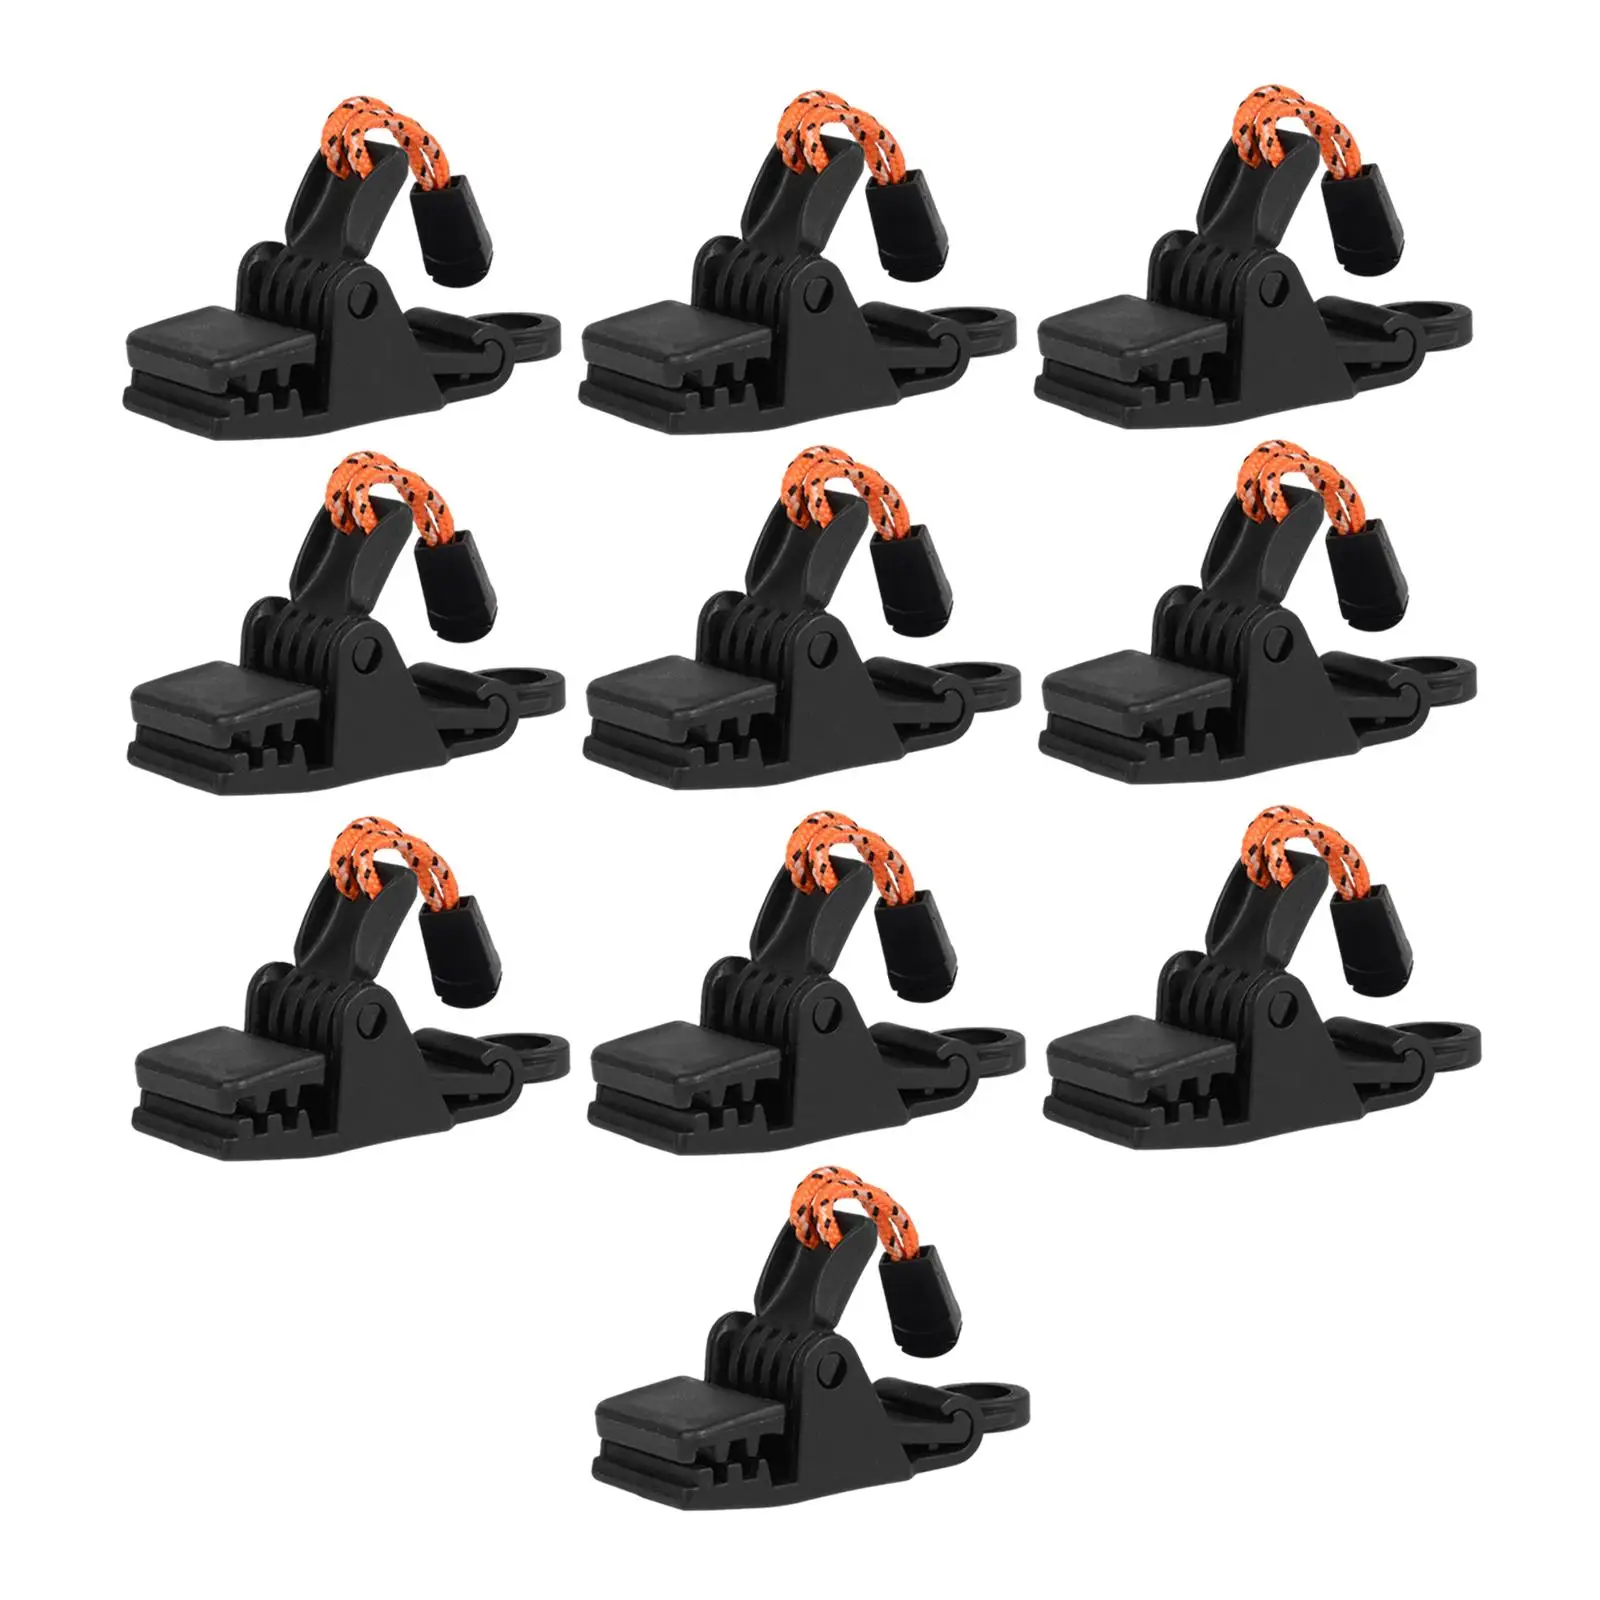 10Pcs Tarp Clips Tent Fasteners Sturdy Load Bearing Lock Grip Awning Clamps Canopy for Fixing Awnings Fishing Canopies Camping